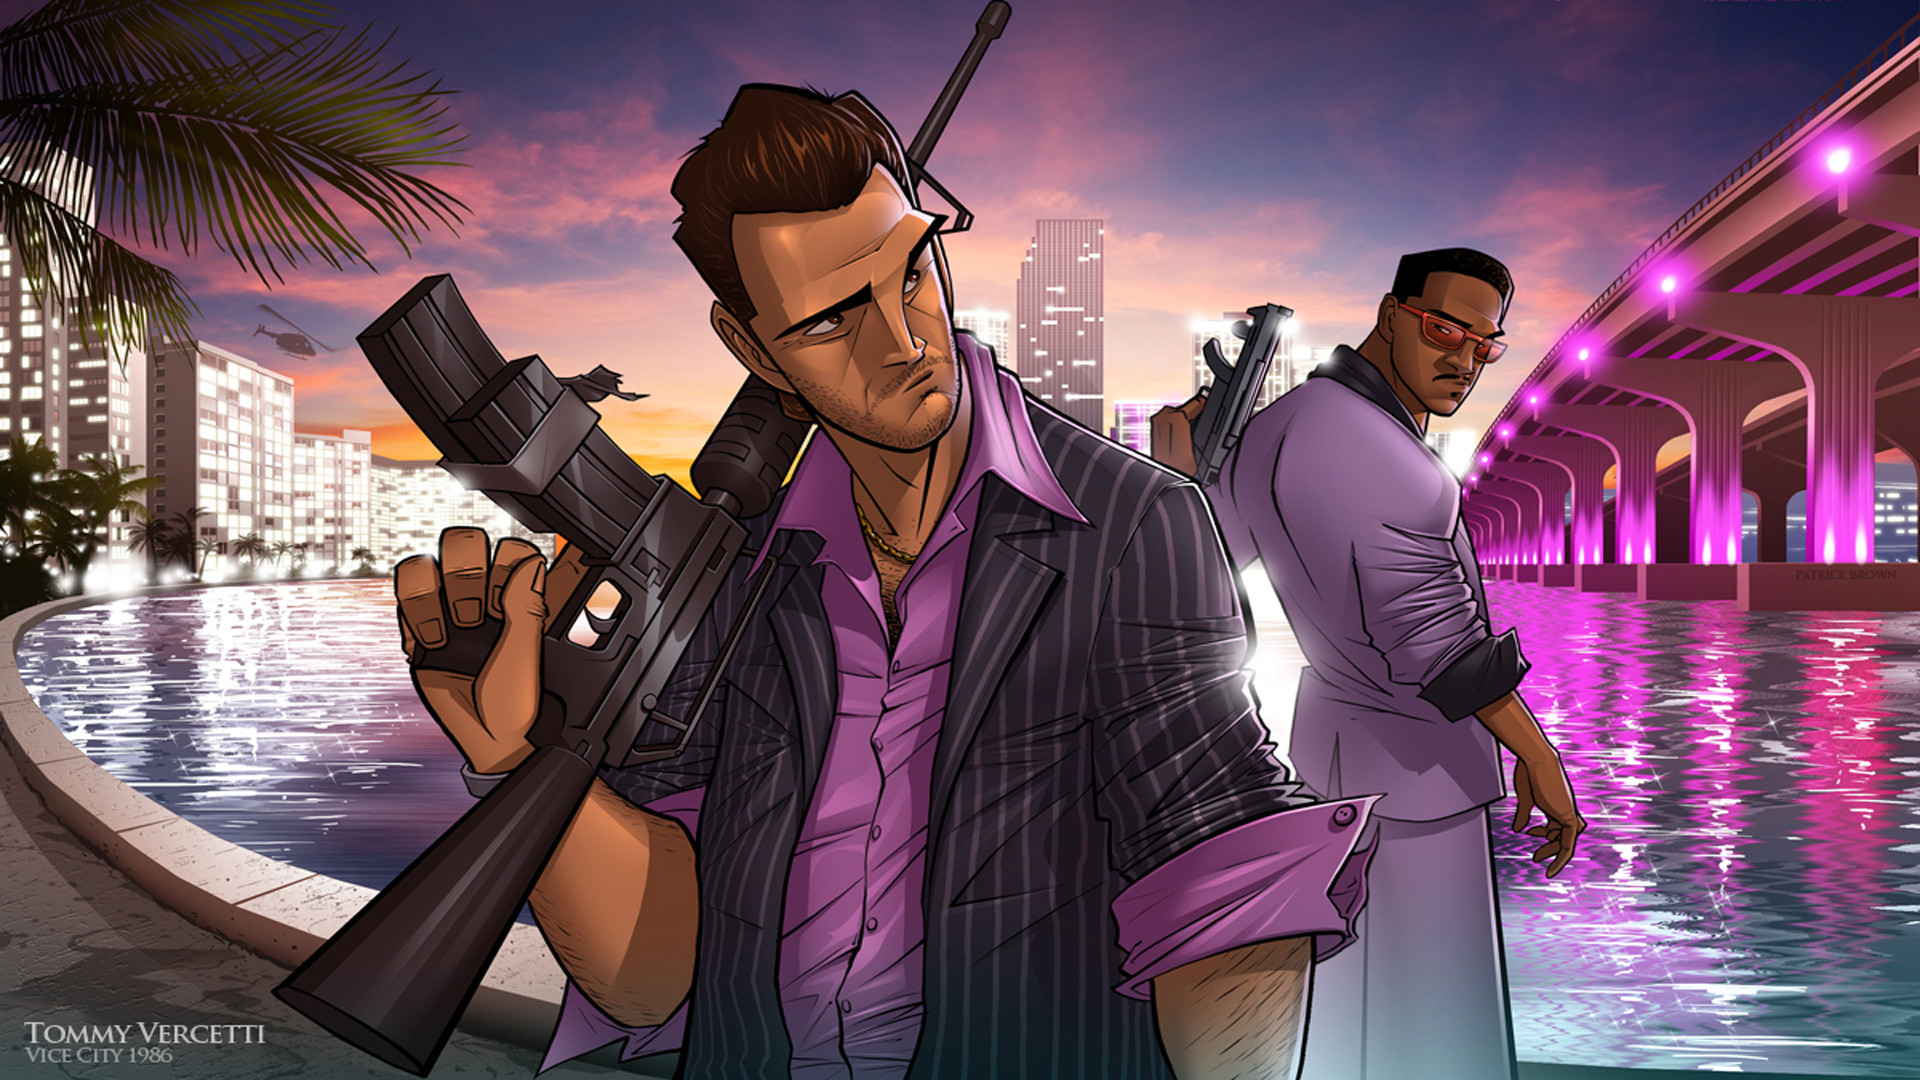 Video Game Grand Theft Auto: Vice City Stories HD Wallpaper